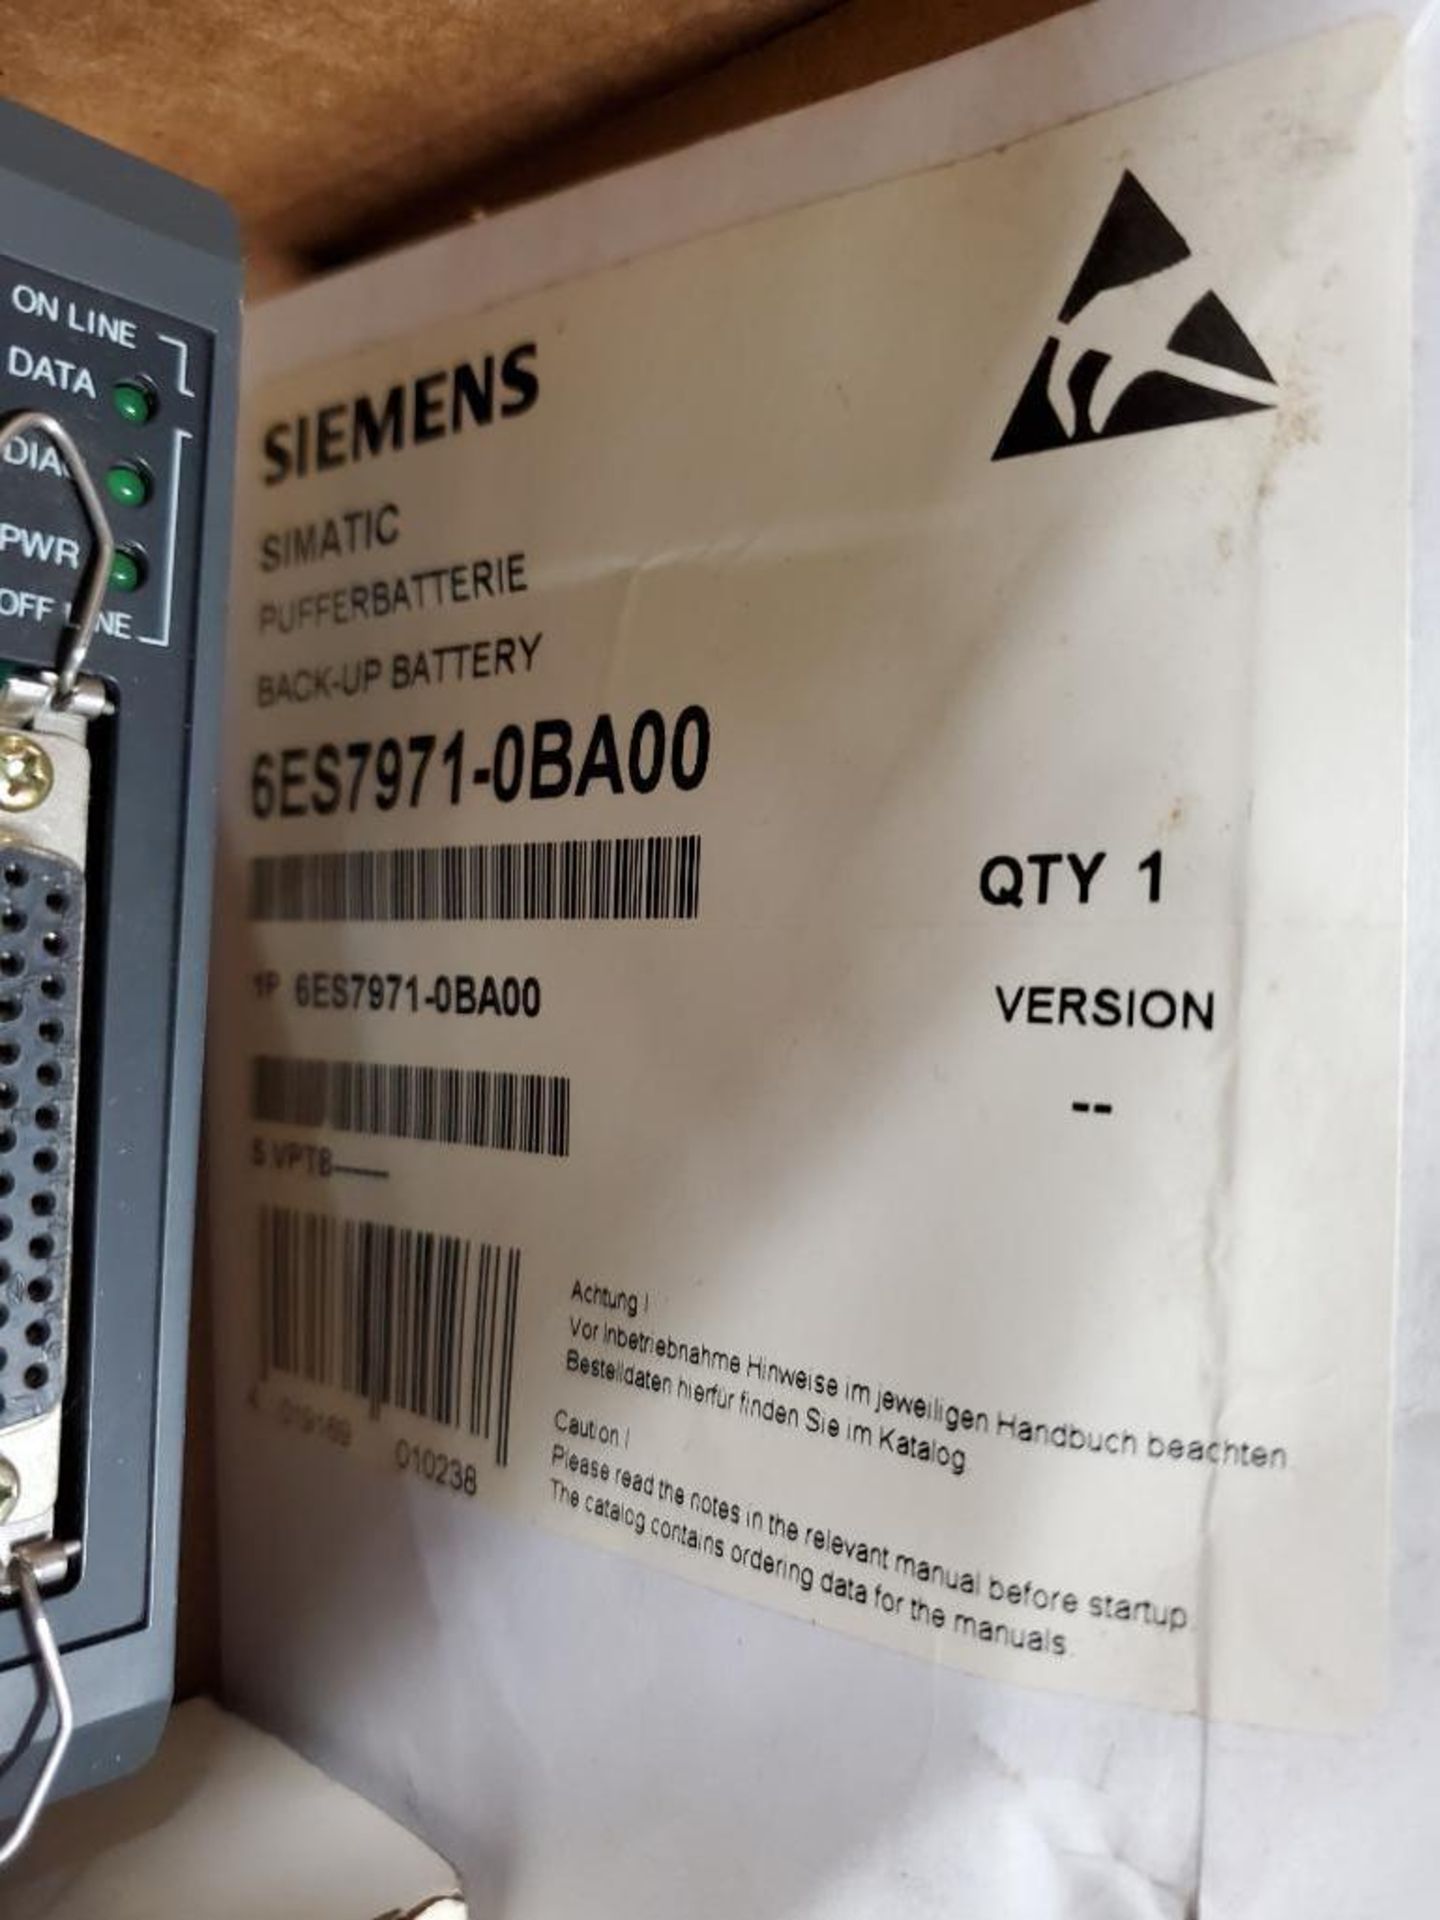 Assorted Siemens electrical. Back-Up battery, Data Comm Unit, text display modules. - Image 2 of 7